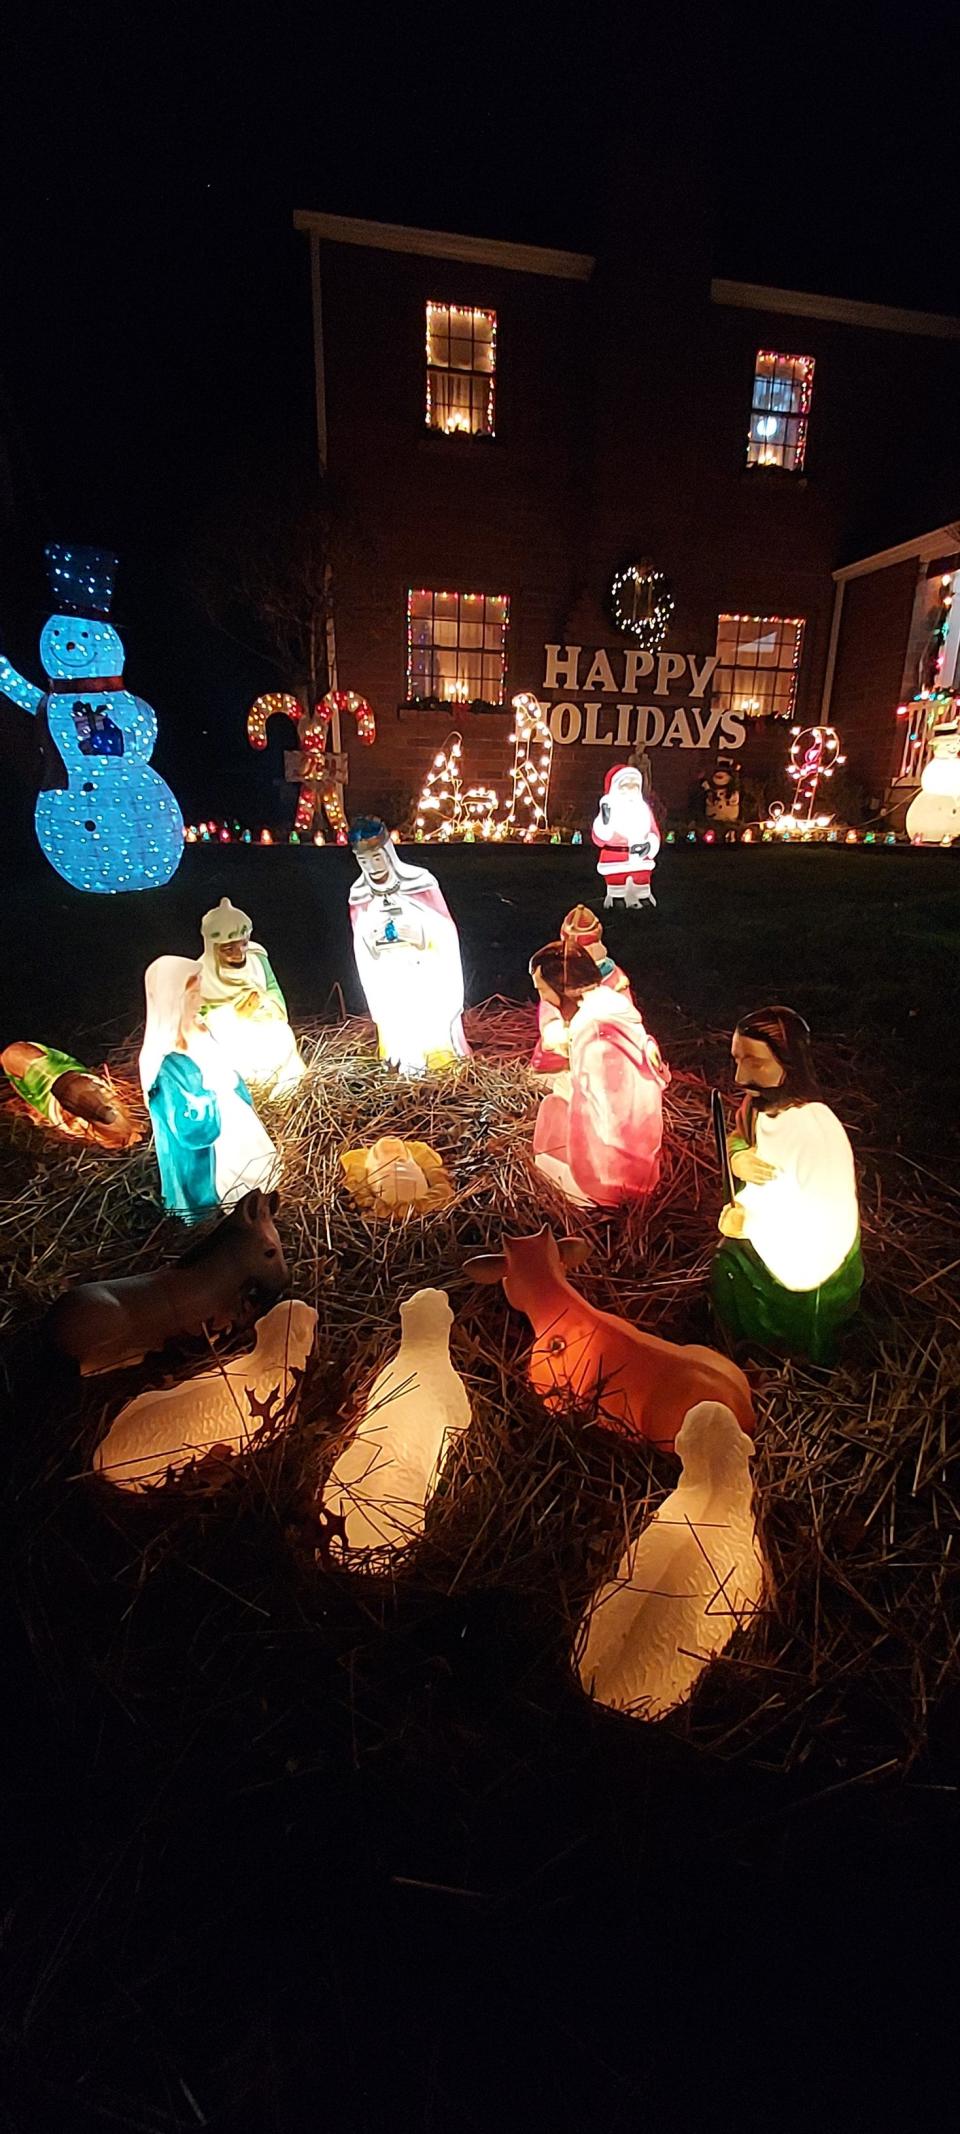 The Melfi family yard lit up with Christmas decorations in Ellwood City.